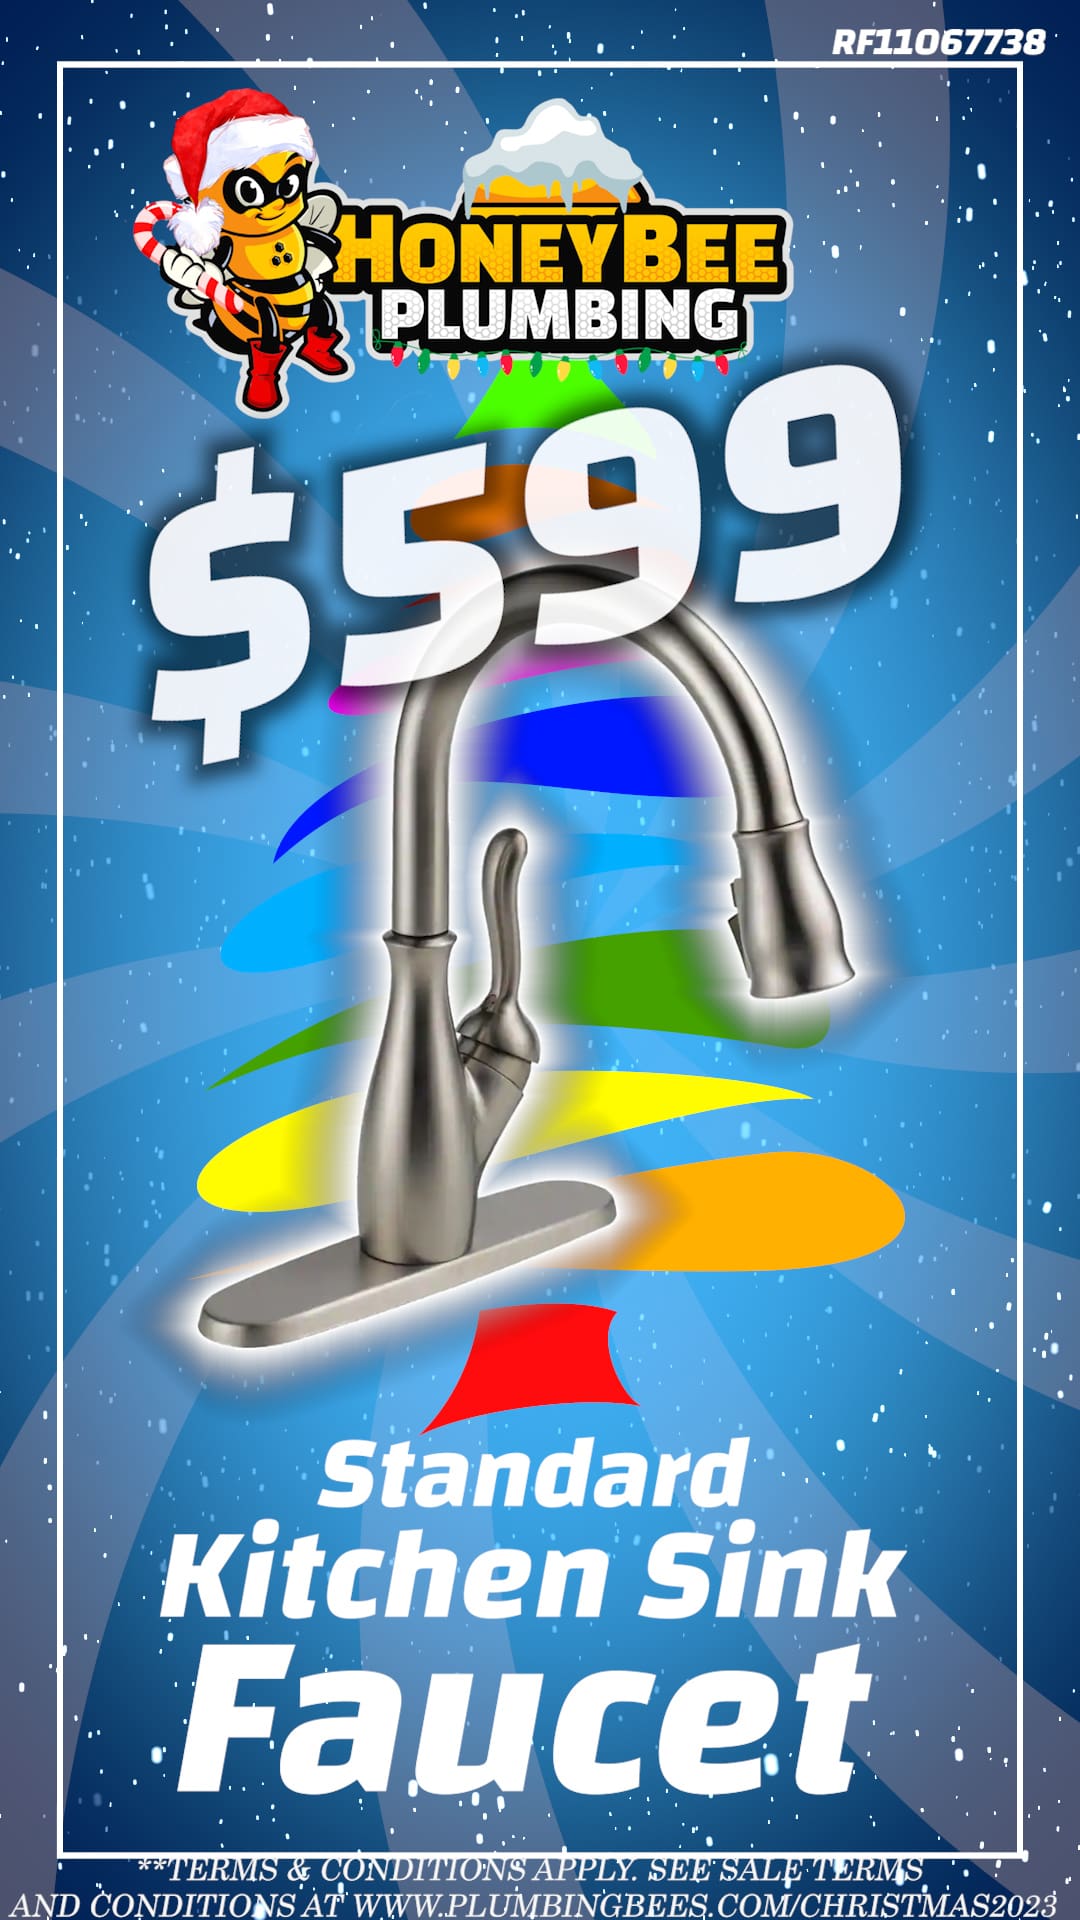 Advertisement for Honey Bee Plumbing's Christmas 2023 special, featuring the installation of a standard pull down kitchen sink faucet for 9. The image highlights the faucet against a festive and visually appealing holiday-themed backdrop, complete with twinkling lights, ornaments, and a color scheme of red, green, and silver. The Honey Bee Plumbing logo is prominently displayed, adding to the seasonal charm of the ad.